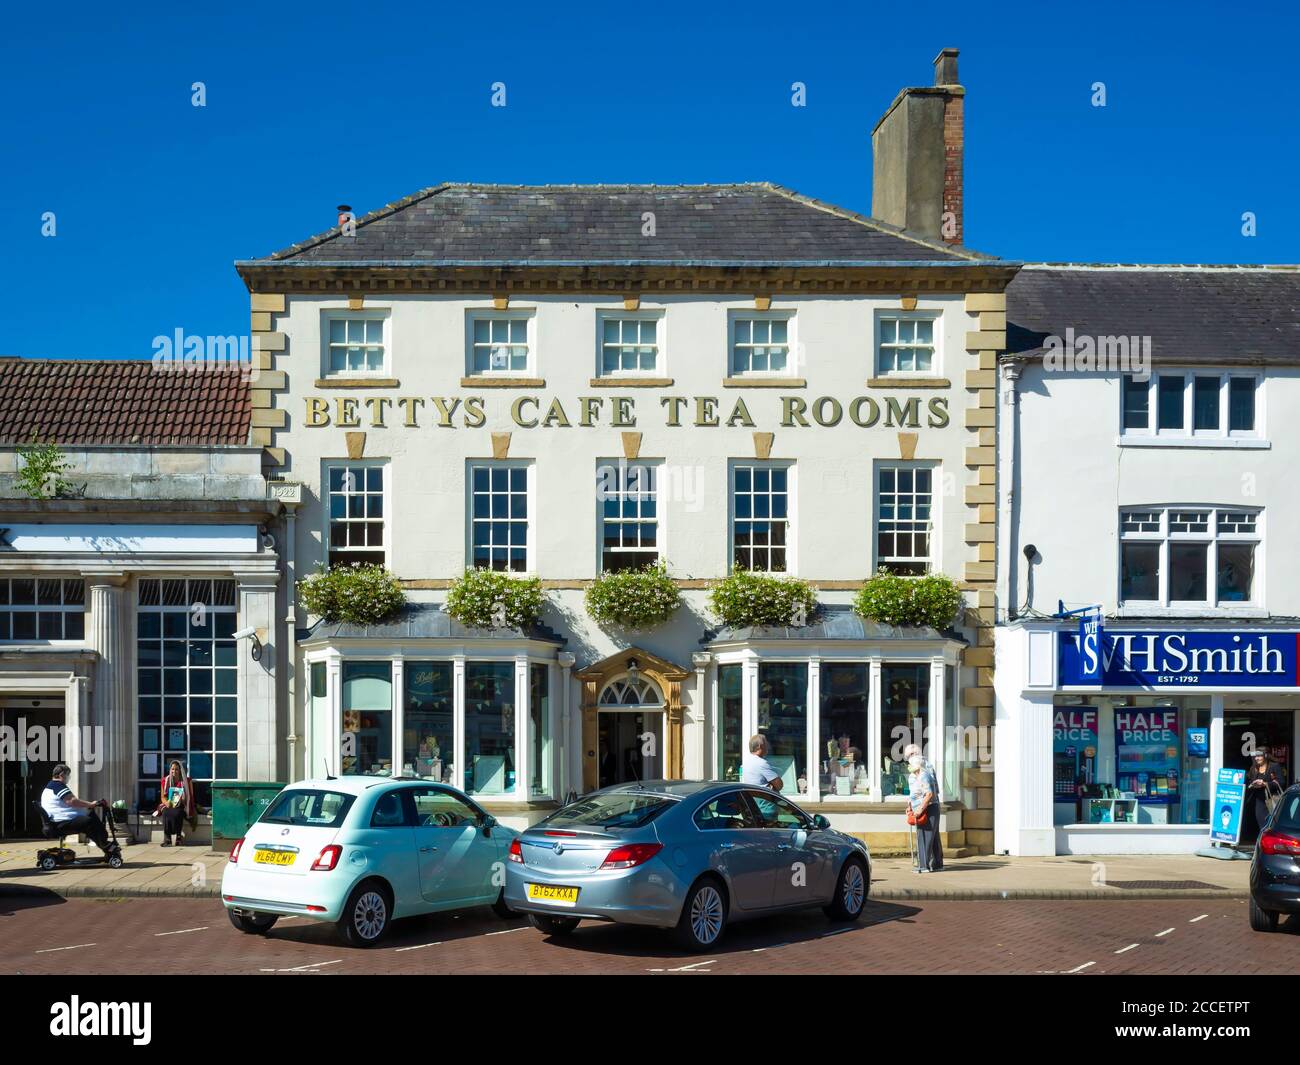 Betty's café tea rooms in the High Street in Northallerton North Yorkshire, UK in summer sunshine Stock Photo